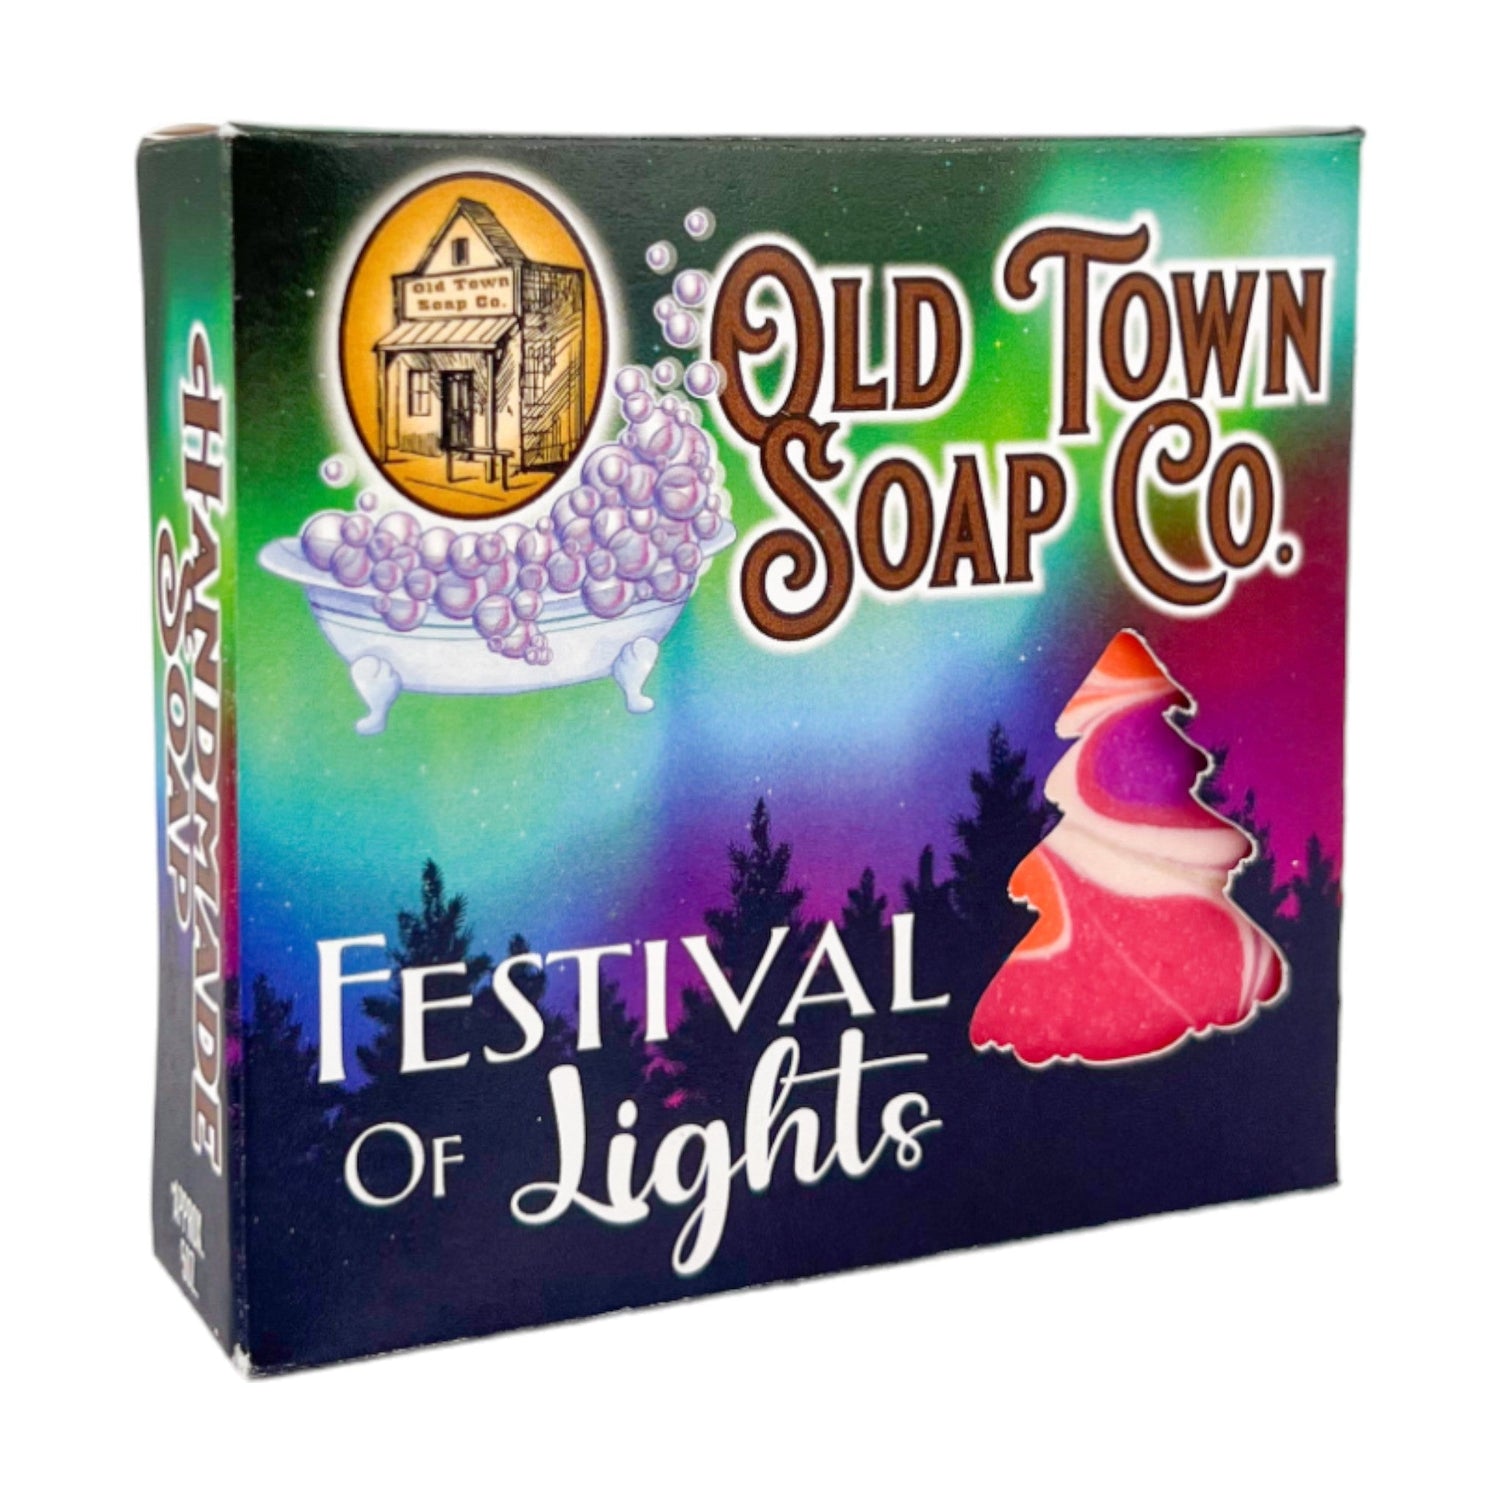 Festival Of Lights -Bar Soap - Old Town Soap Co.